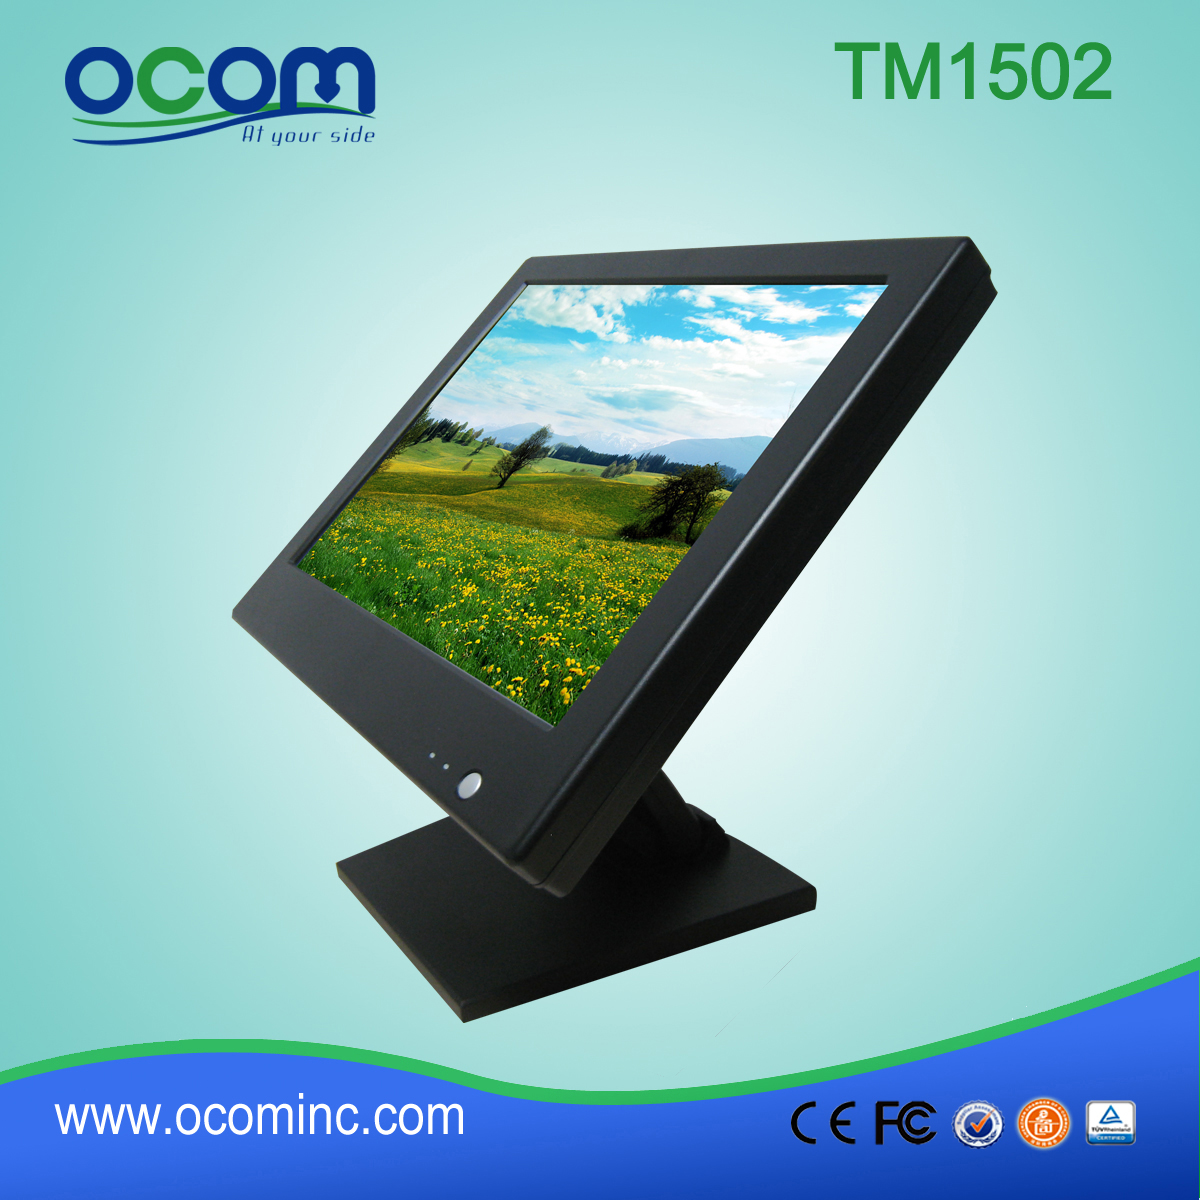 TM1502 Made In China LED Touch Monitor prezzo